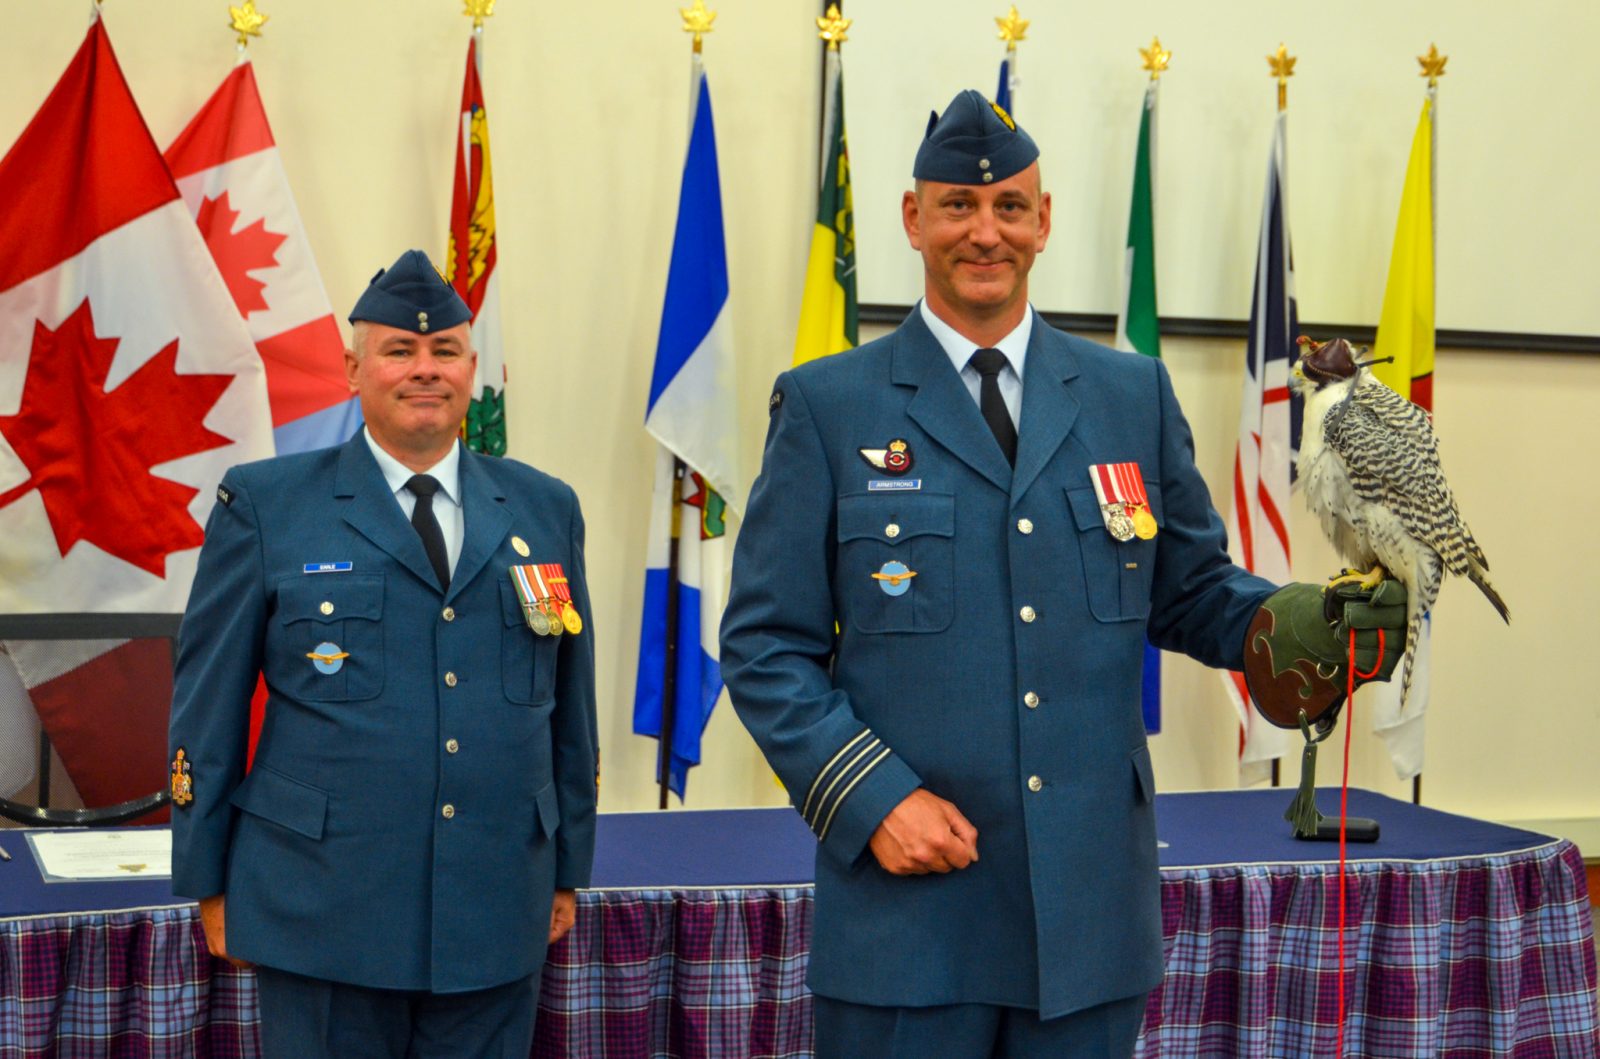 Change of command at CFSACO in Cornwall